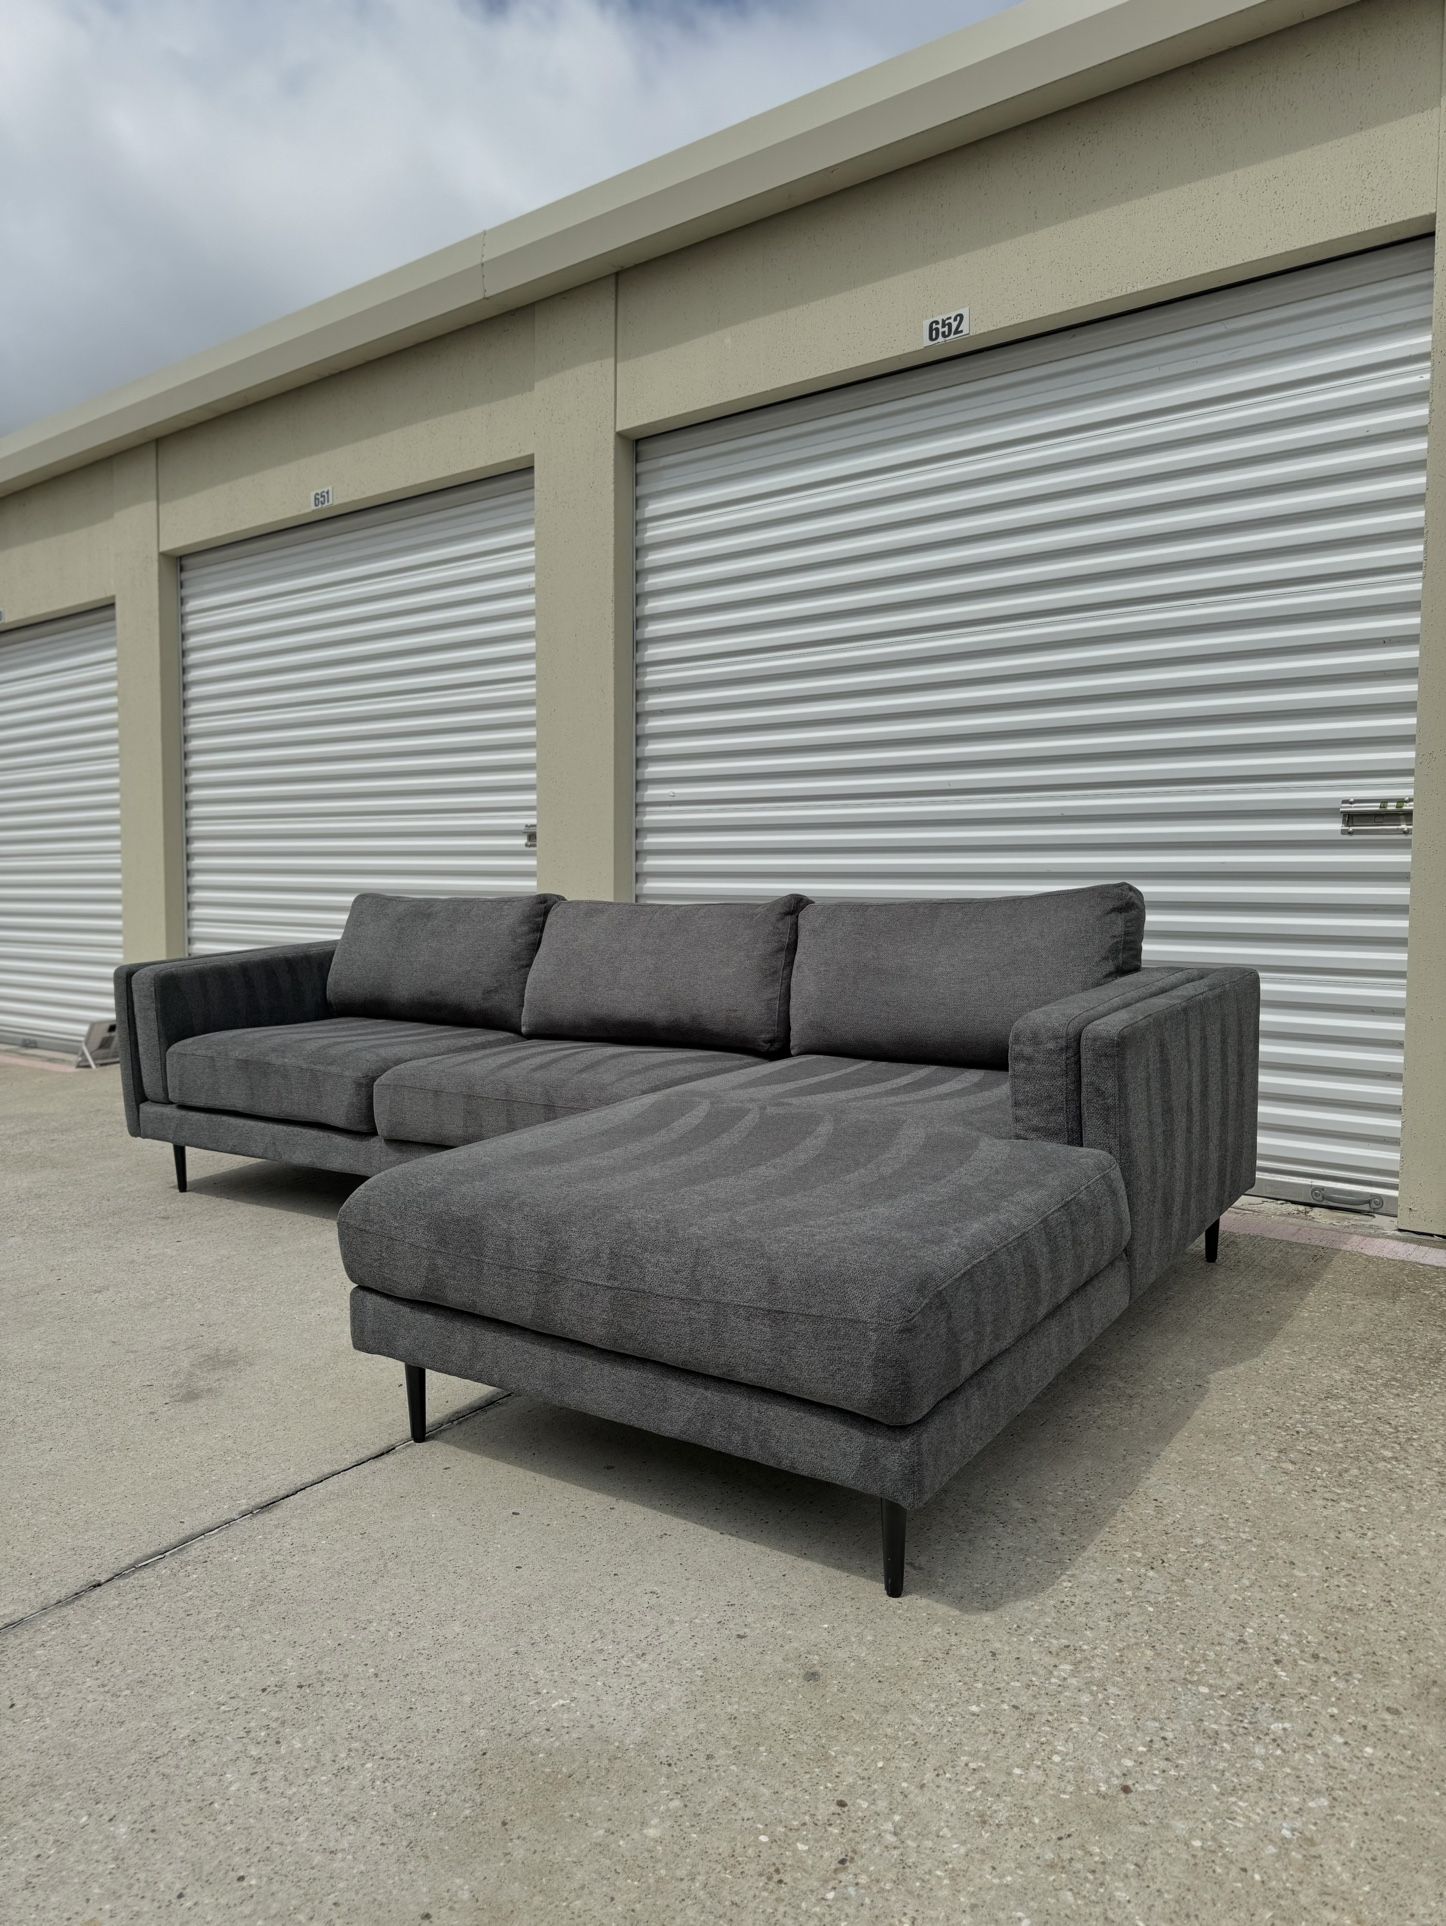 New Beautiful Grey Living Spaces Sectional Sofa, Can Deliver!